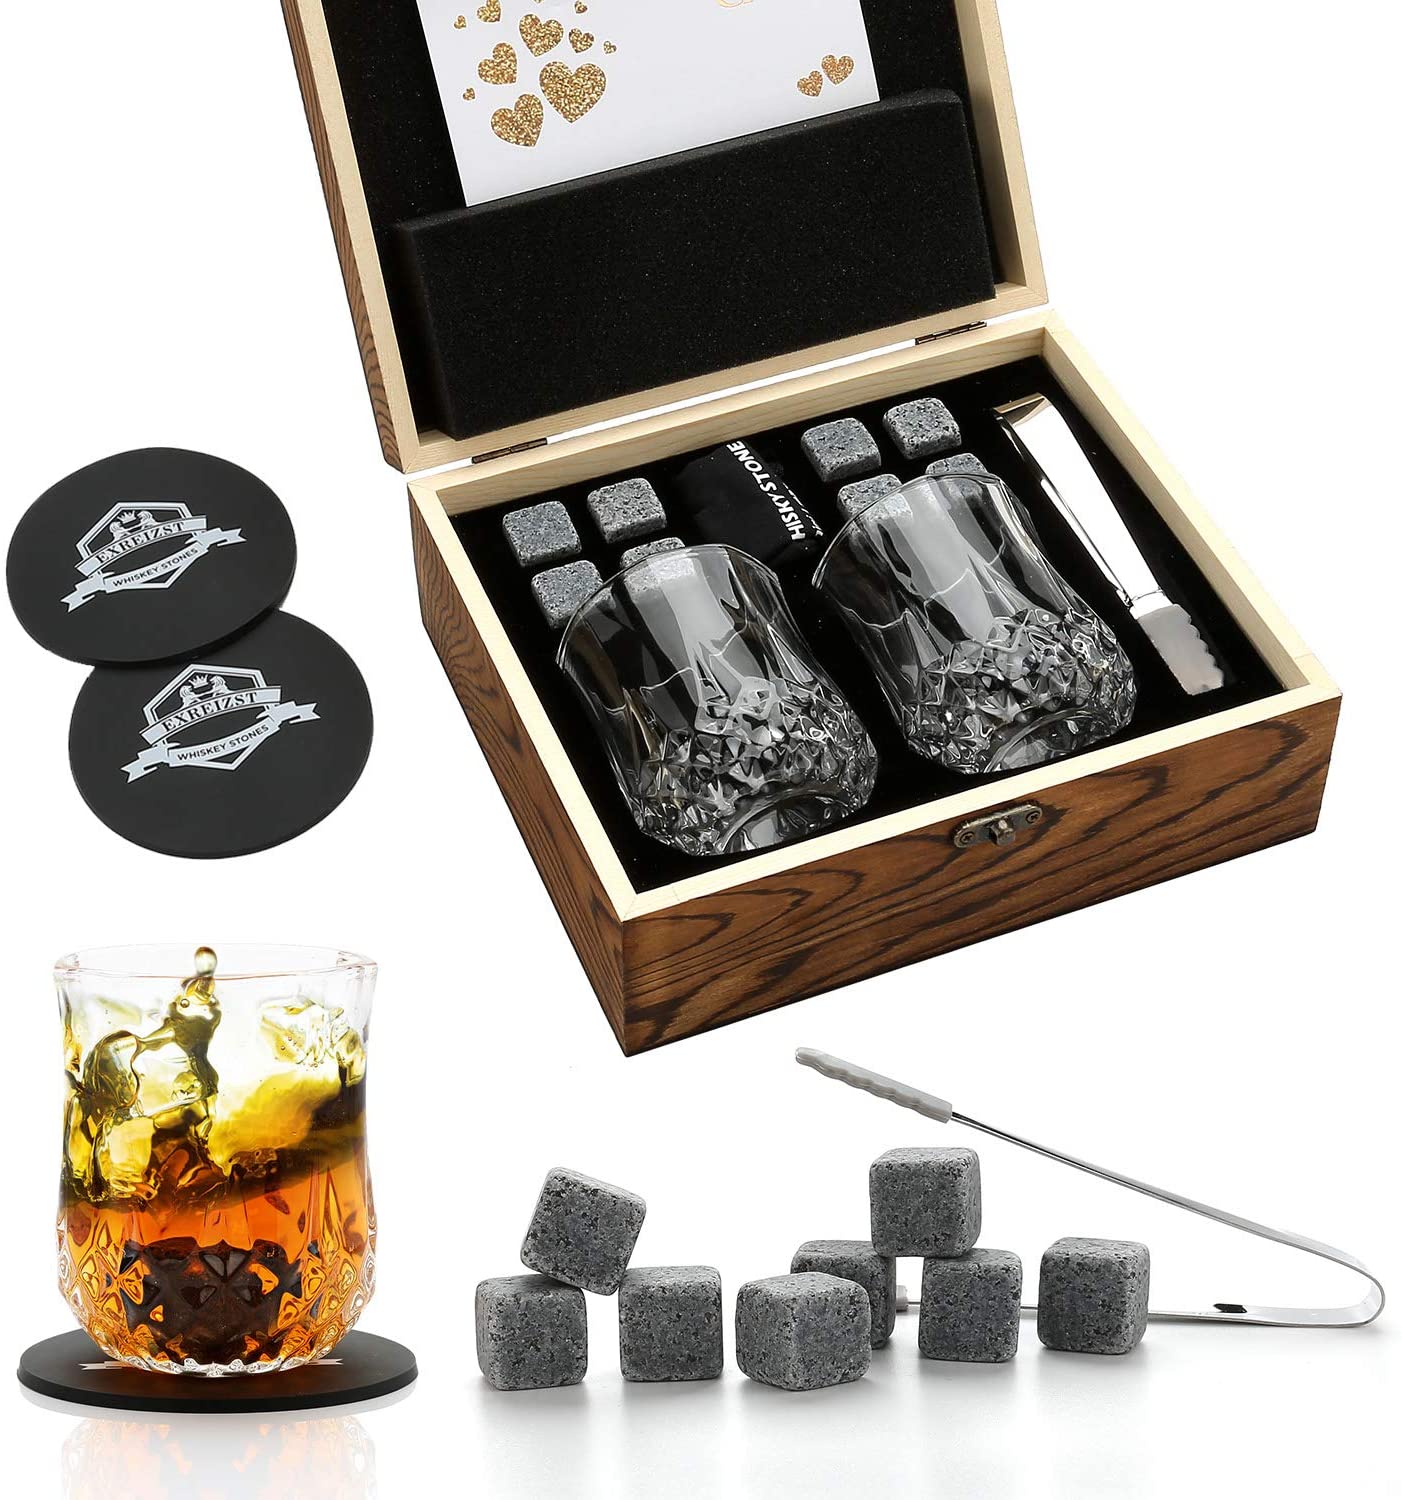 Lighten Life Whiskey Decanter and Glass Set,Whiskey Decanter Set with 12  Cooling Whiskey Stones,4 Slate Coasters and Tong,Premium Bourbon Decanter  Set in Gift Box,Crystal Liquor Decanter Set for Men 